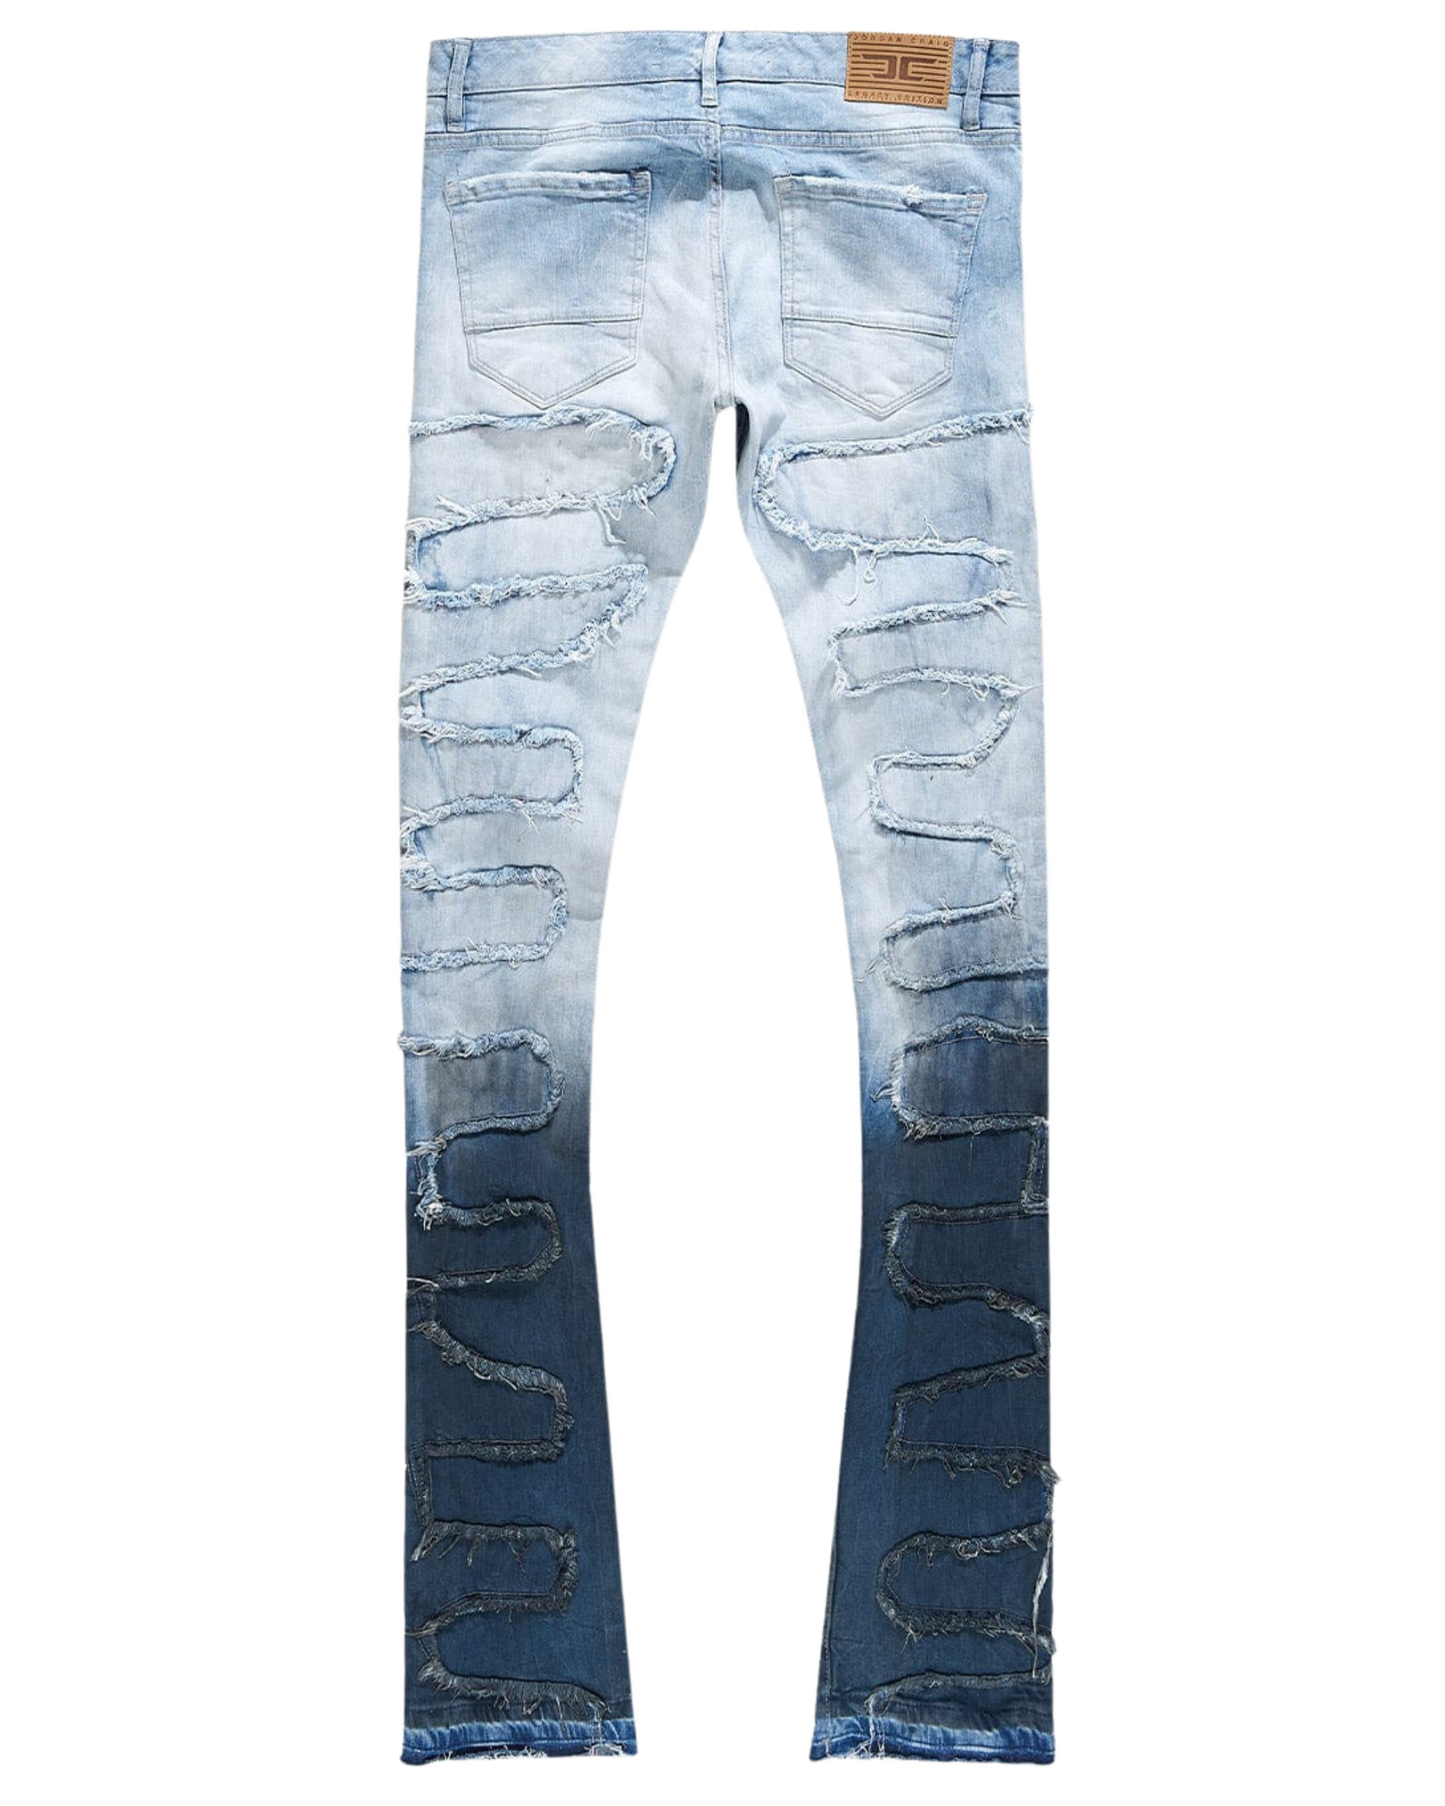 Kids Oasis Stacked Jeans JTF1131